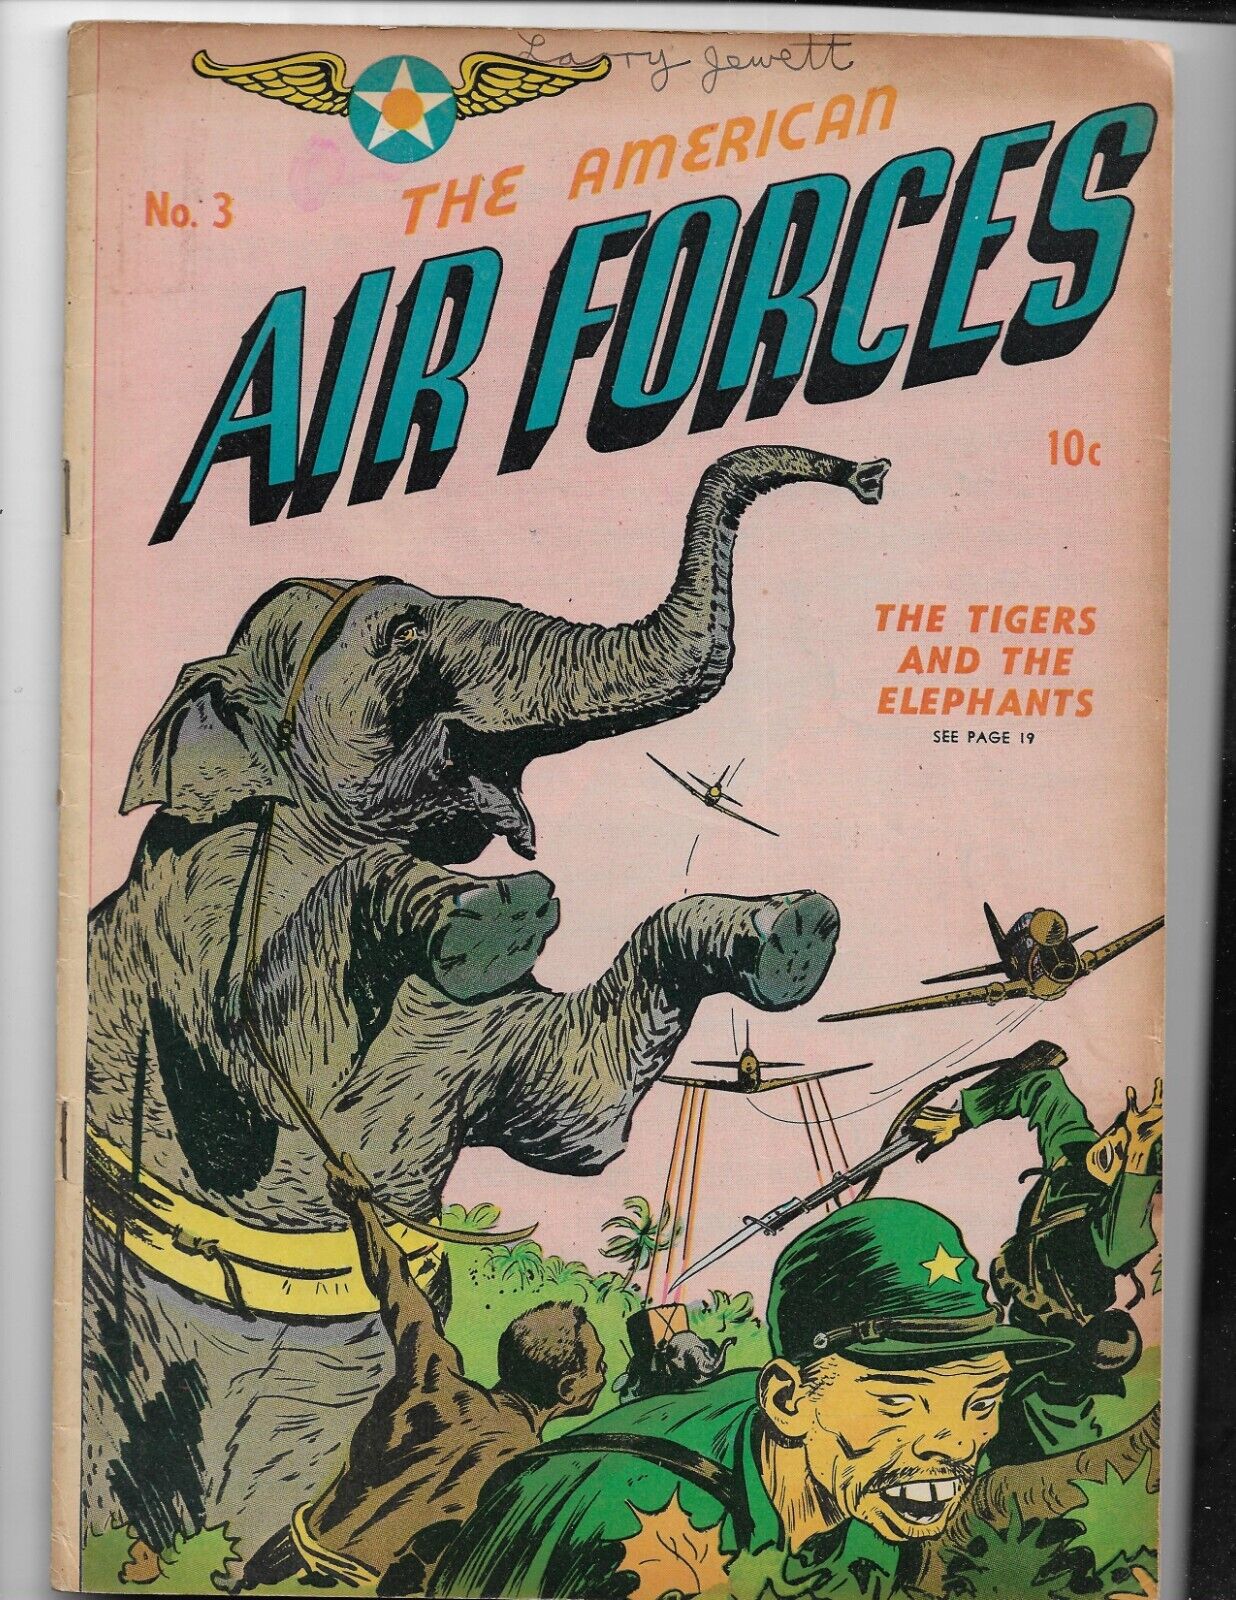 AMERICAN AIR FORCES 3 - VG/F 5.0 - CLASSIC WWII JAPANESE COVER (1945)